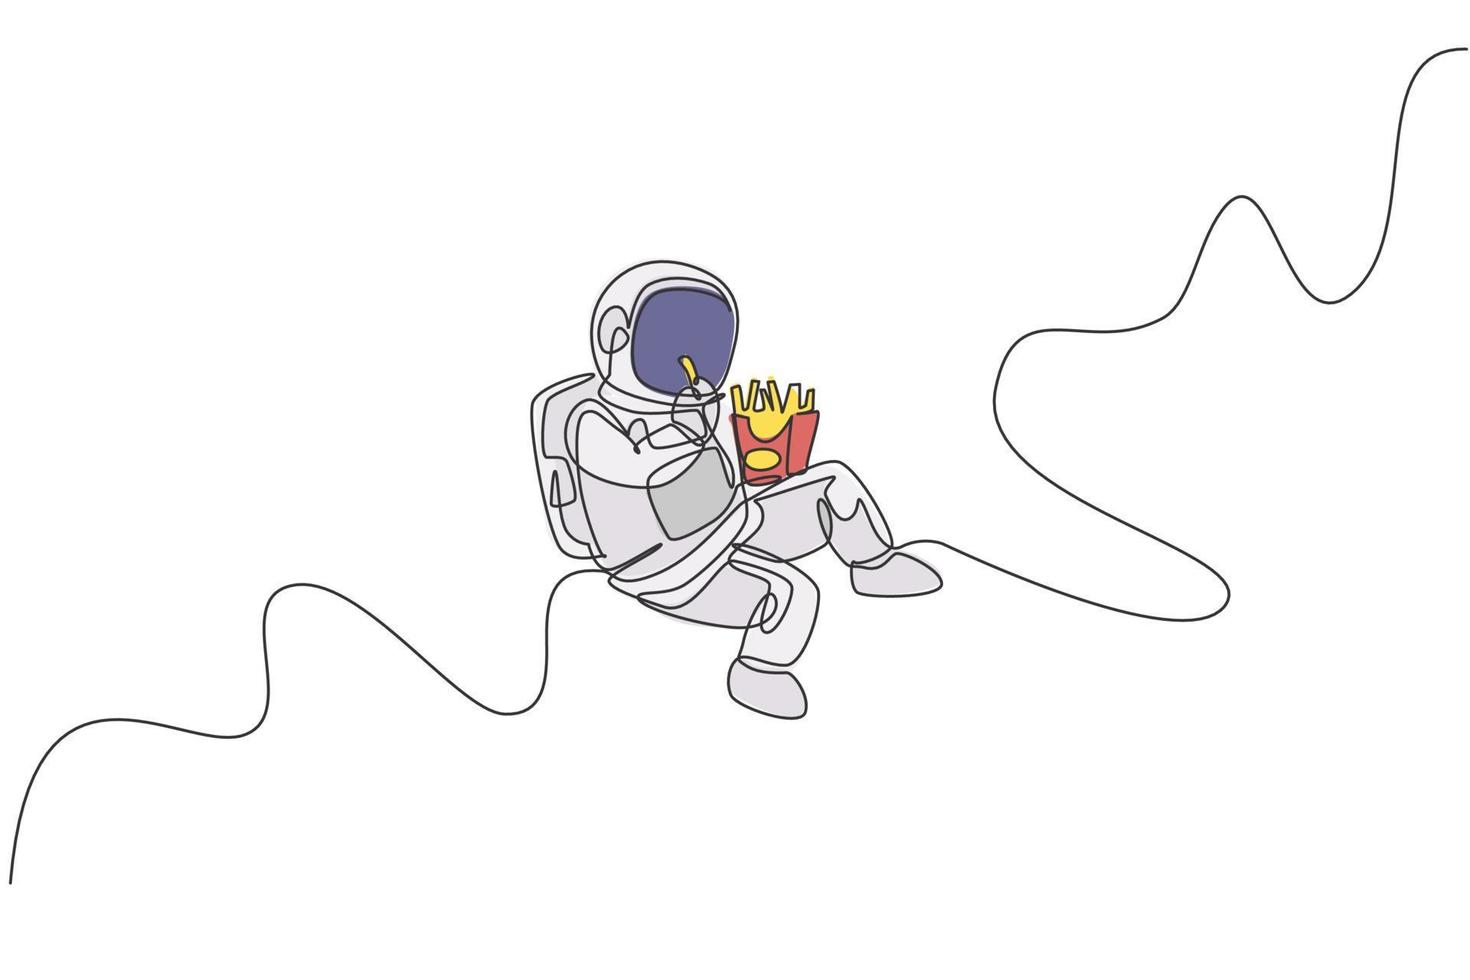 One single line drawing of astronaut flying in cosmos galaxy while eating french fries vector graphic illustration. Fantasy outer space life concept. Modern continuous line draw design